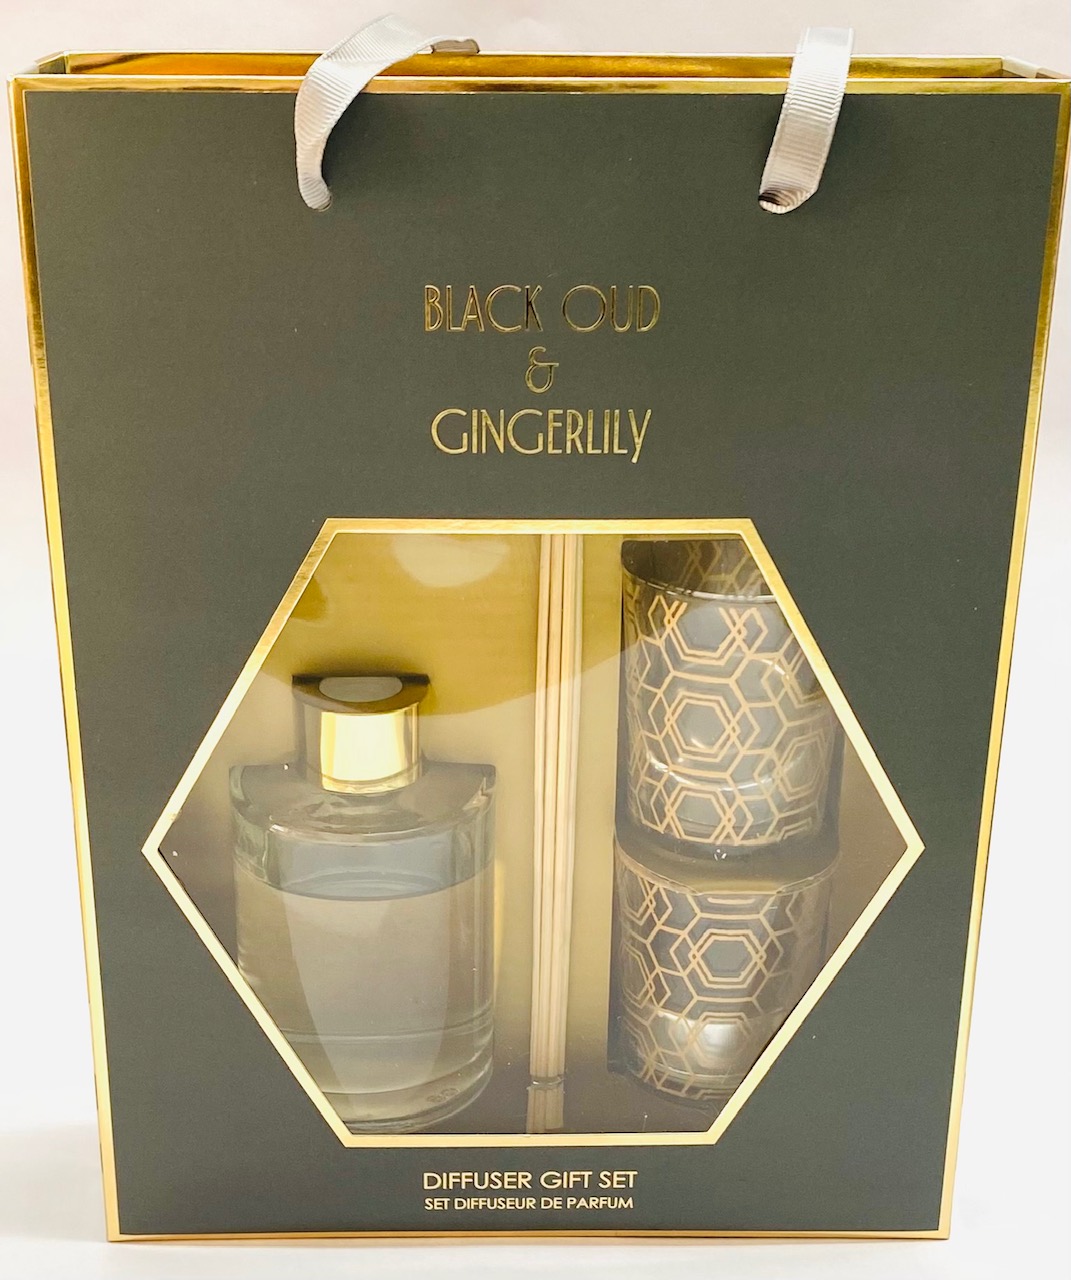 Black OUD & Gingerlilly Reed Diffuser Set in a Gift Box